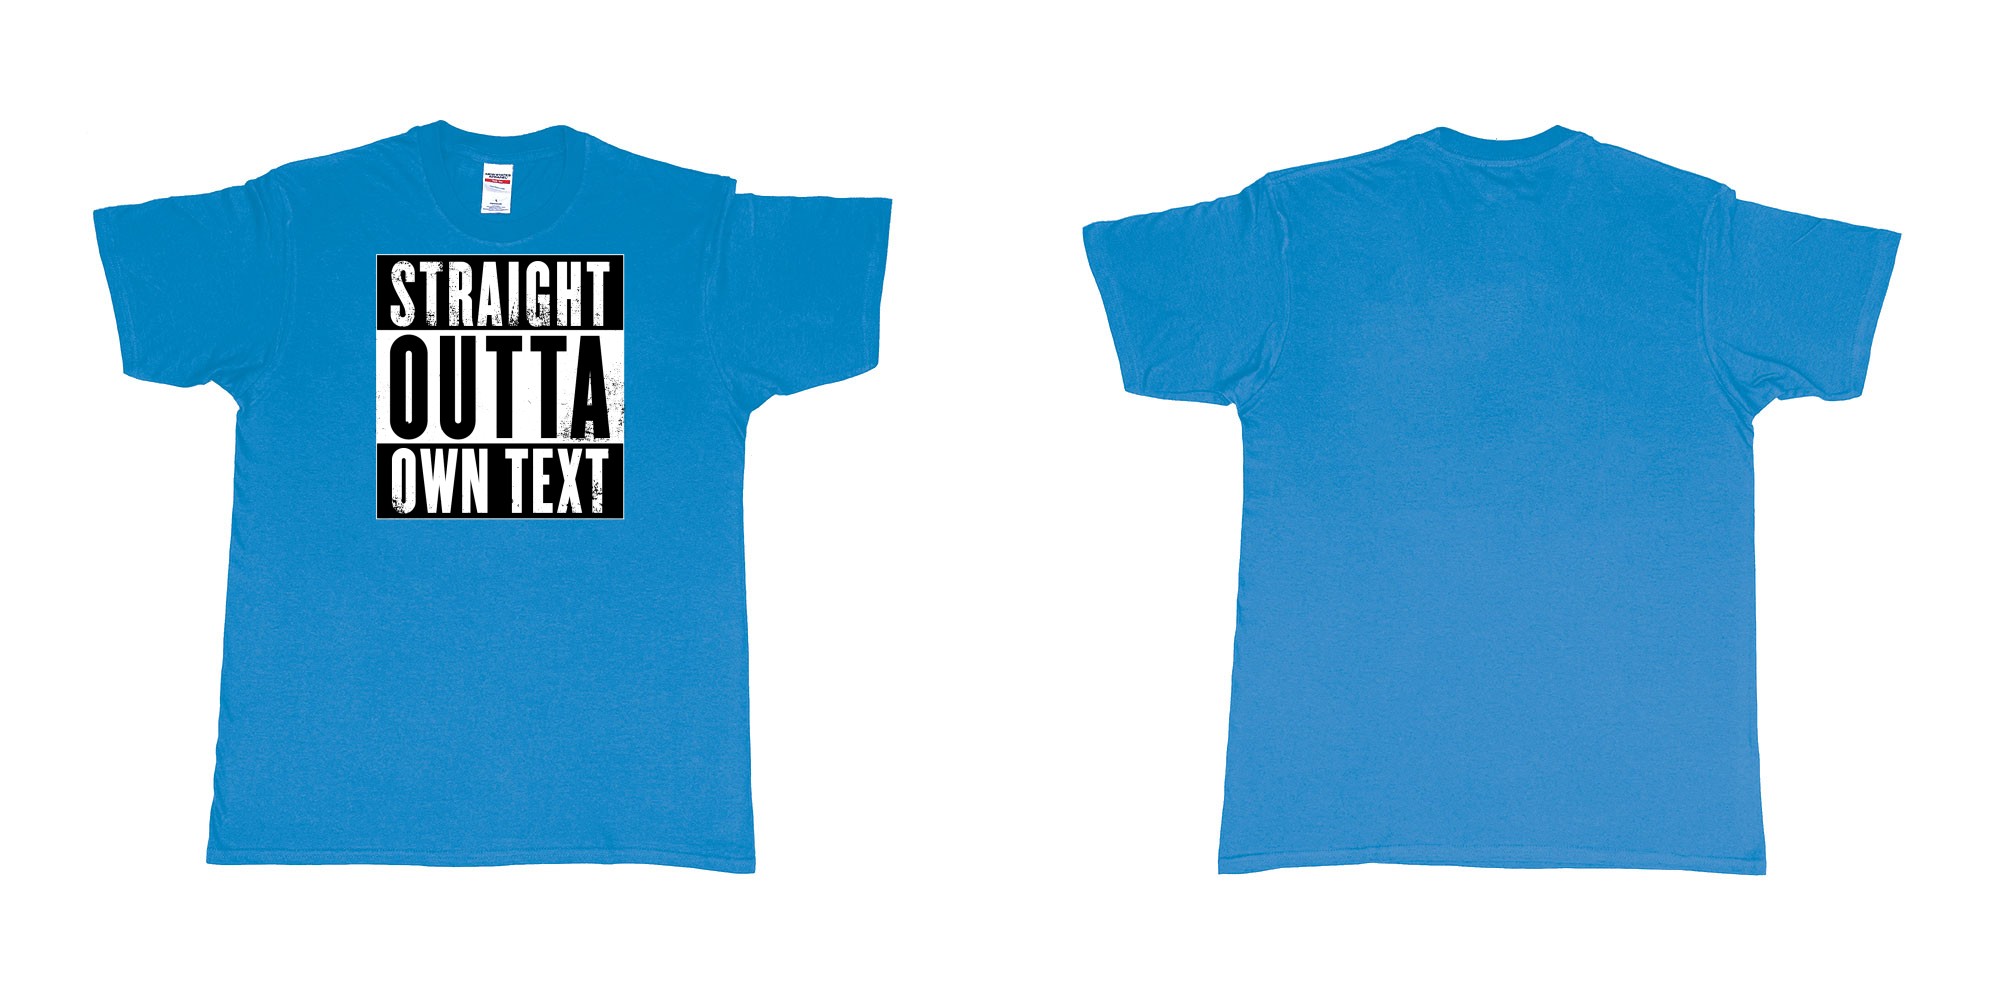 Custom tshirt design Straight Outta Compton in fabric color sapphire choice your own text made in Bali by The Pirate Way